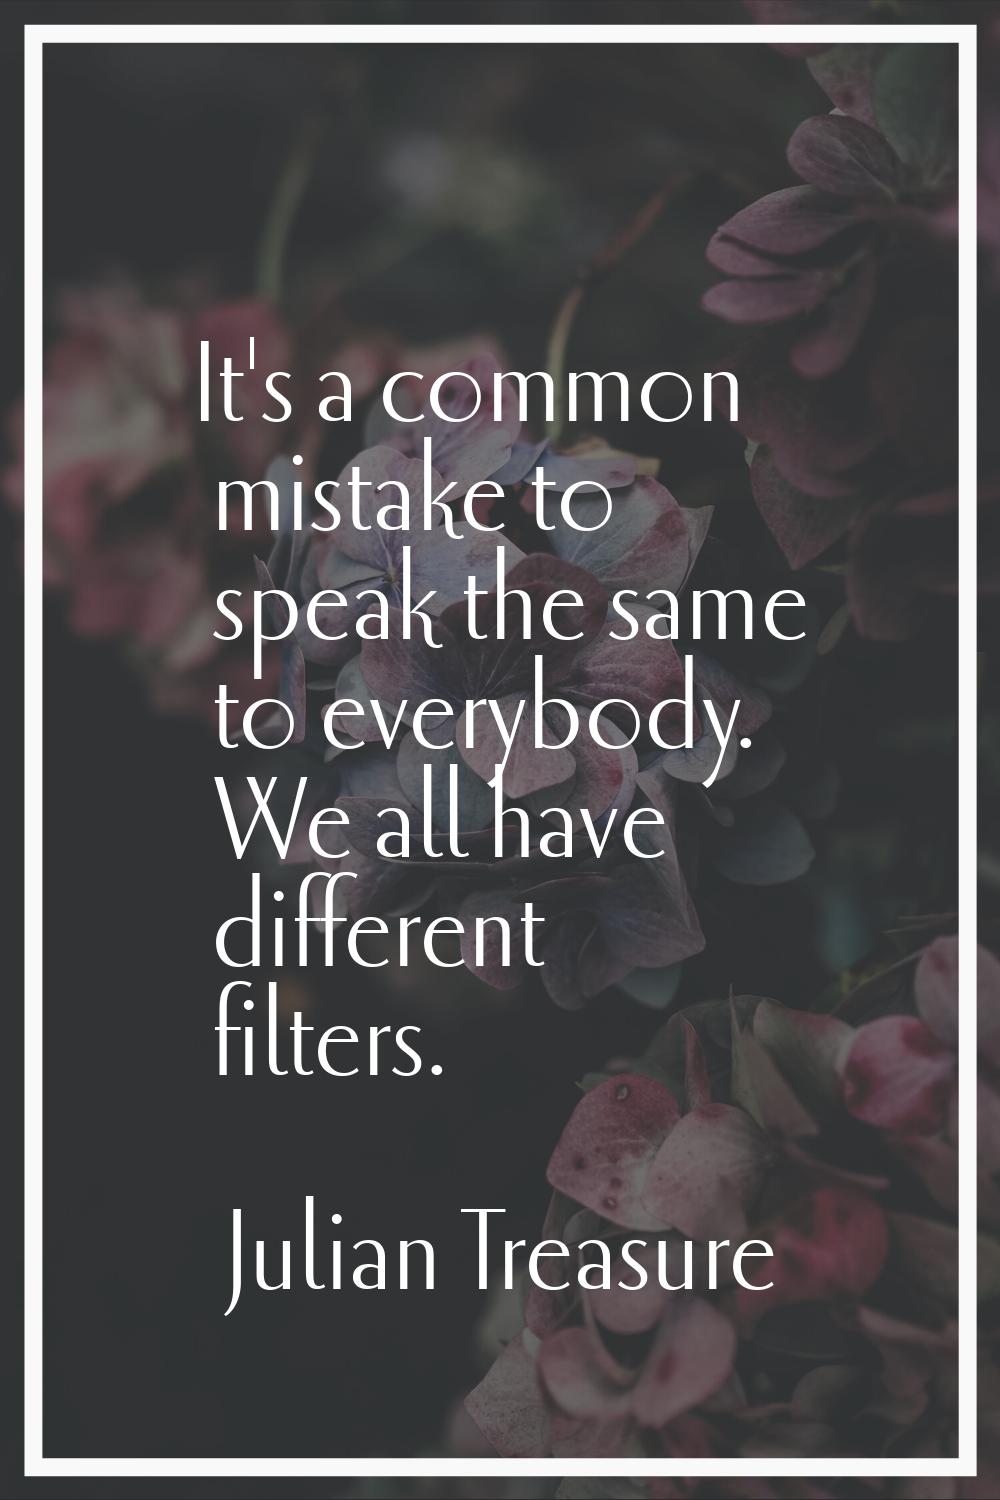 It's a common mistake to speak the same to everybody. We all have different filters.